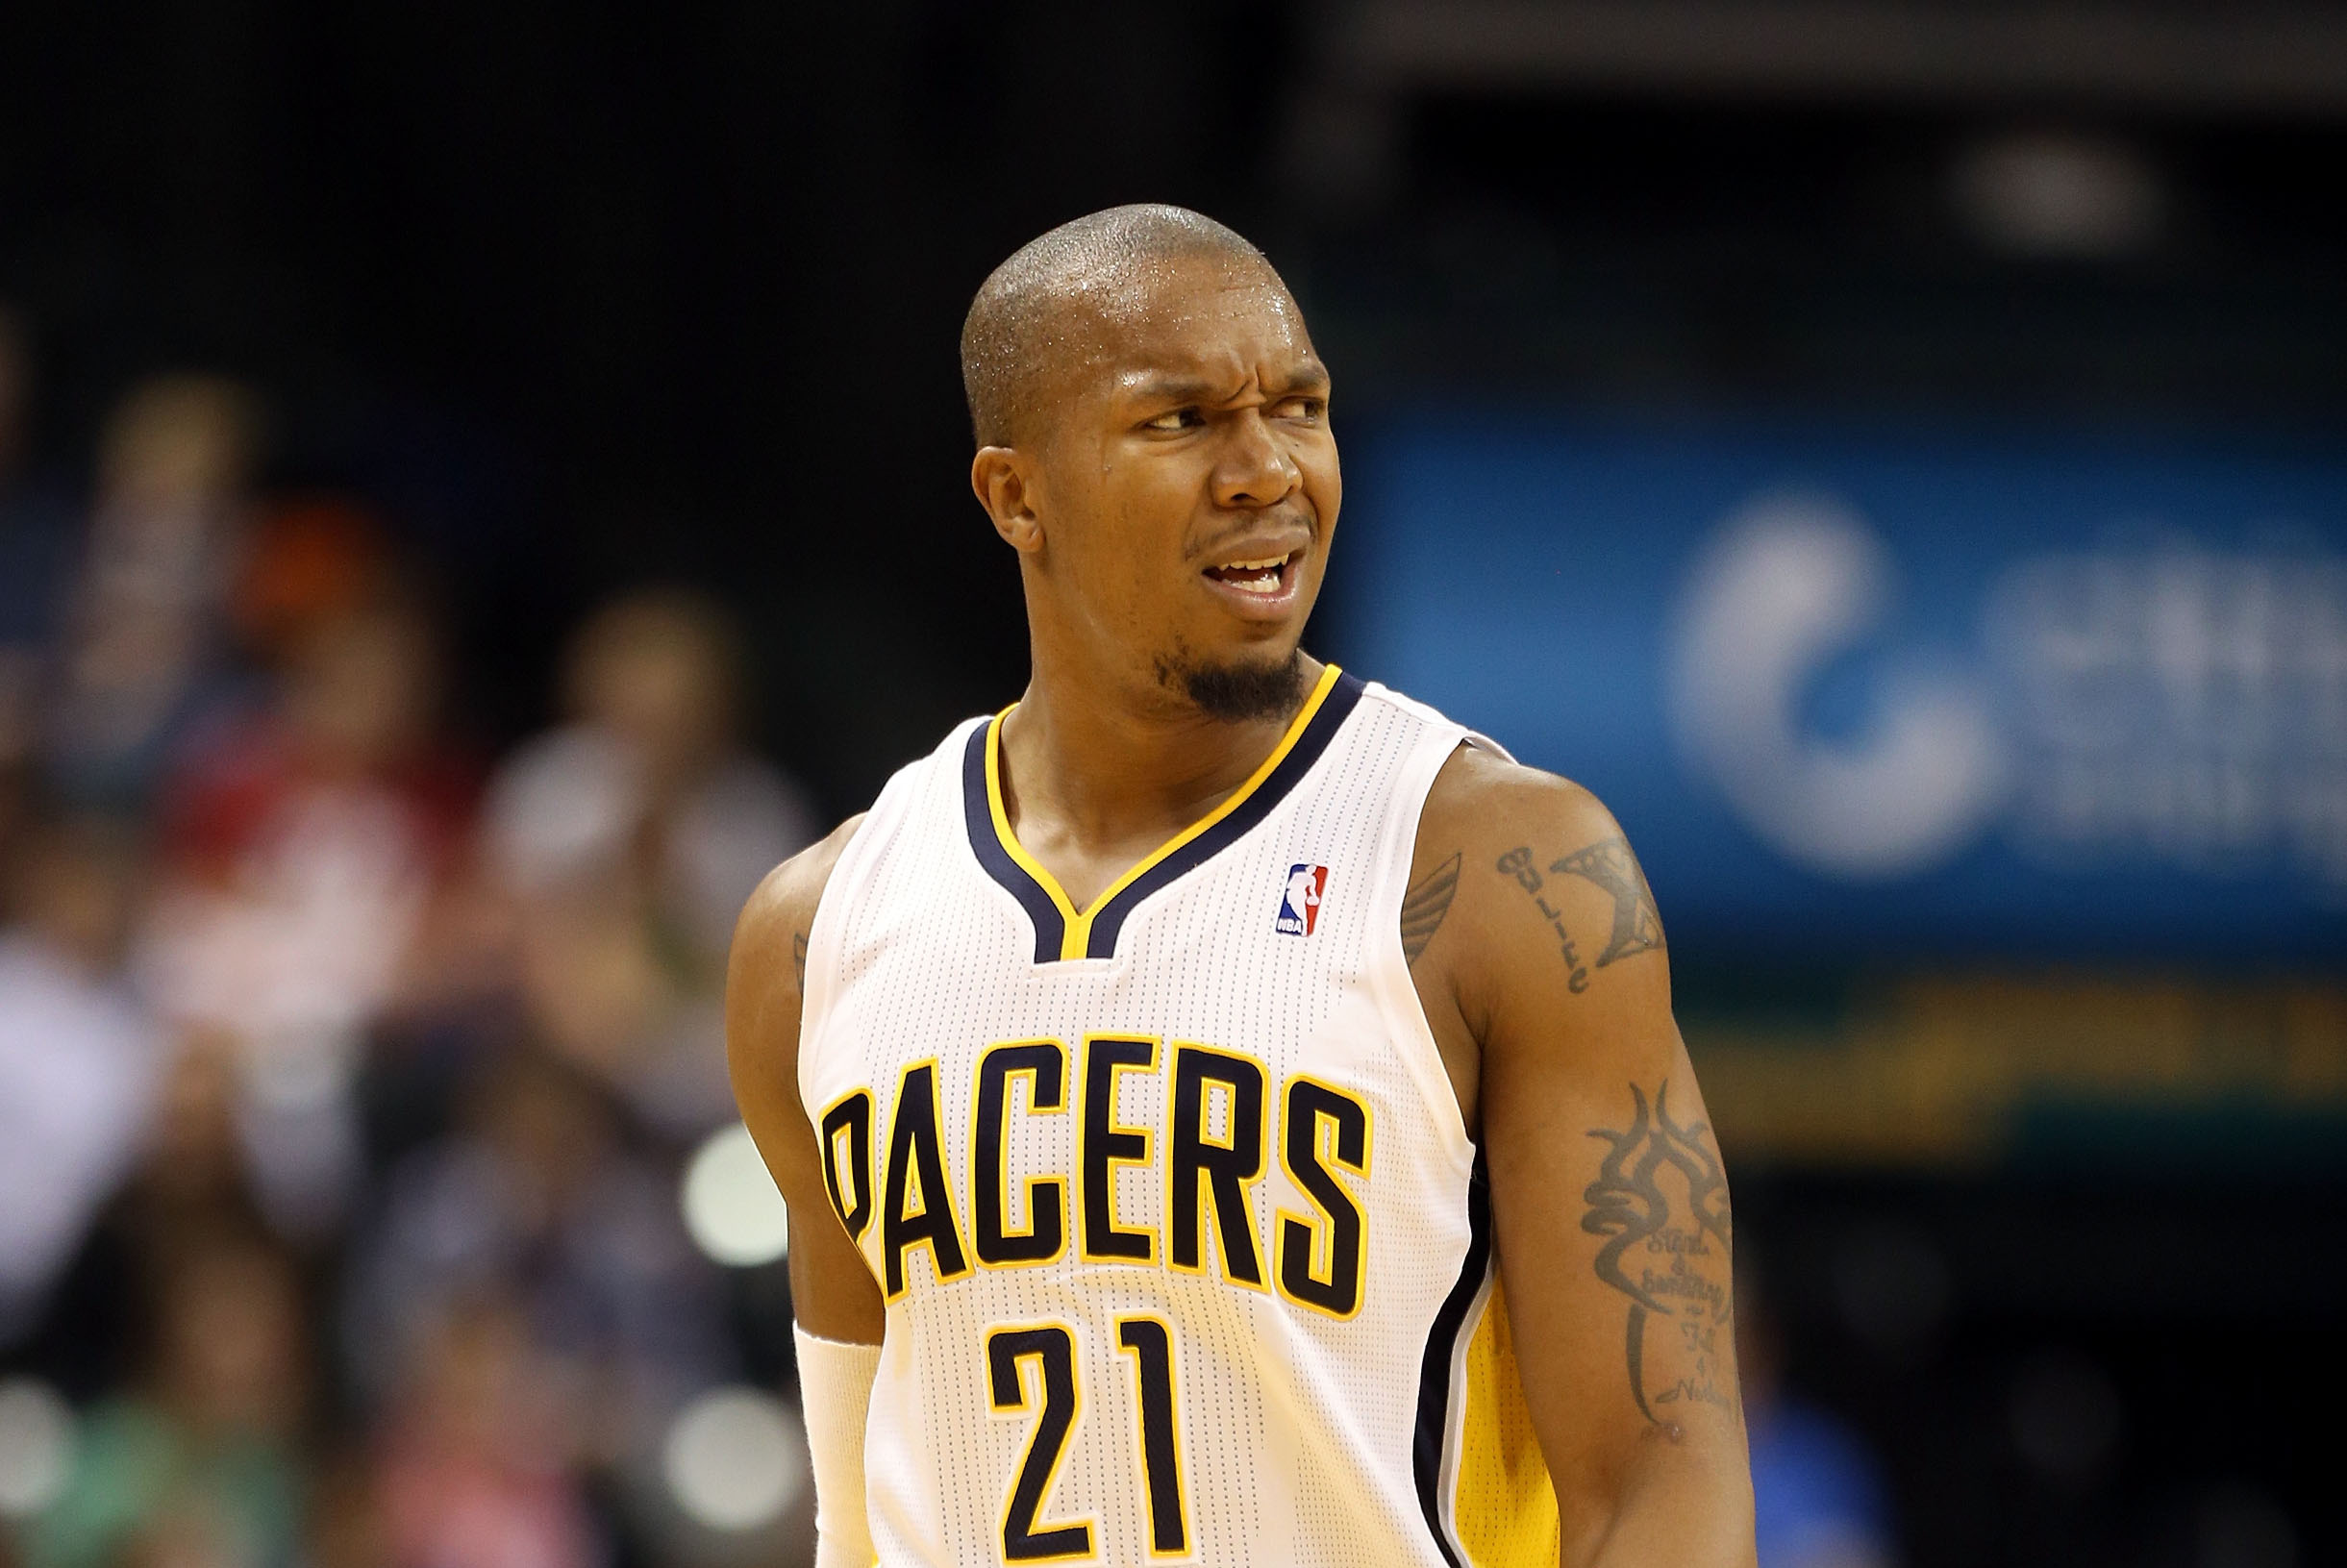 David West's late 3-pointer helps propel Pacers past Heat